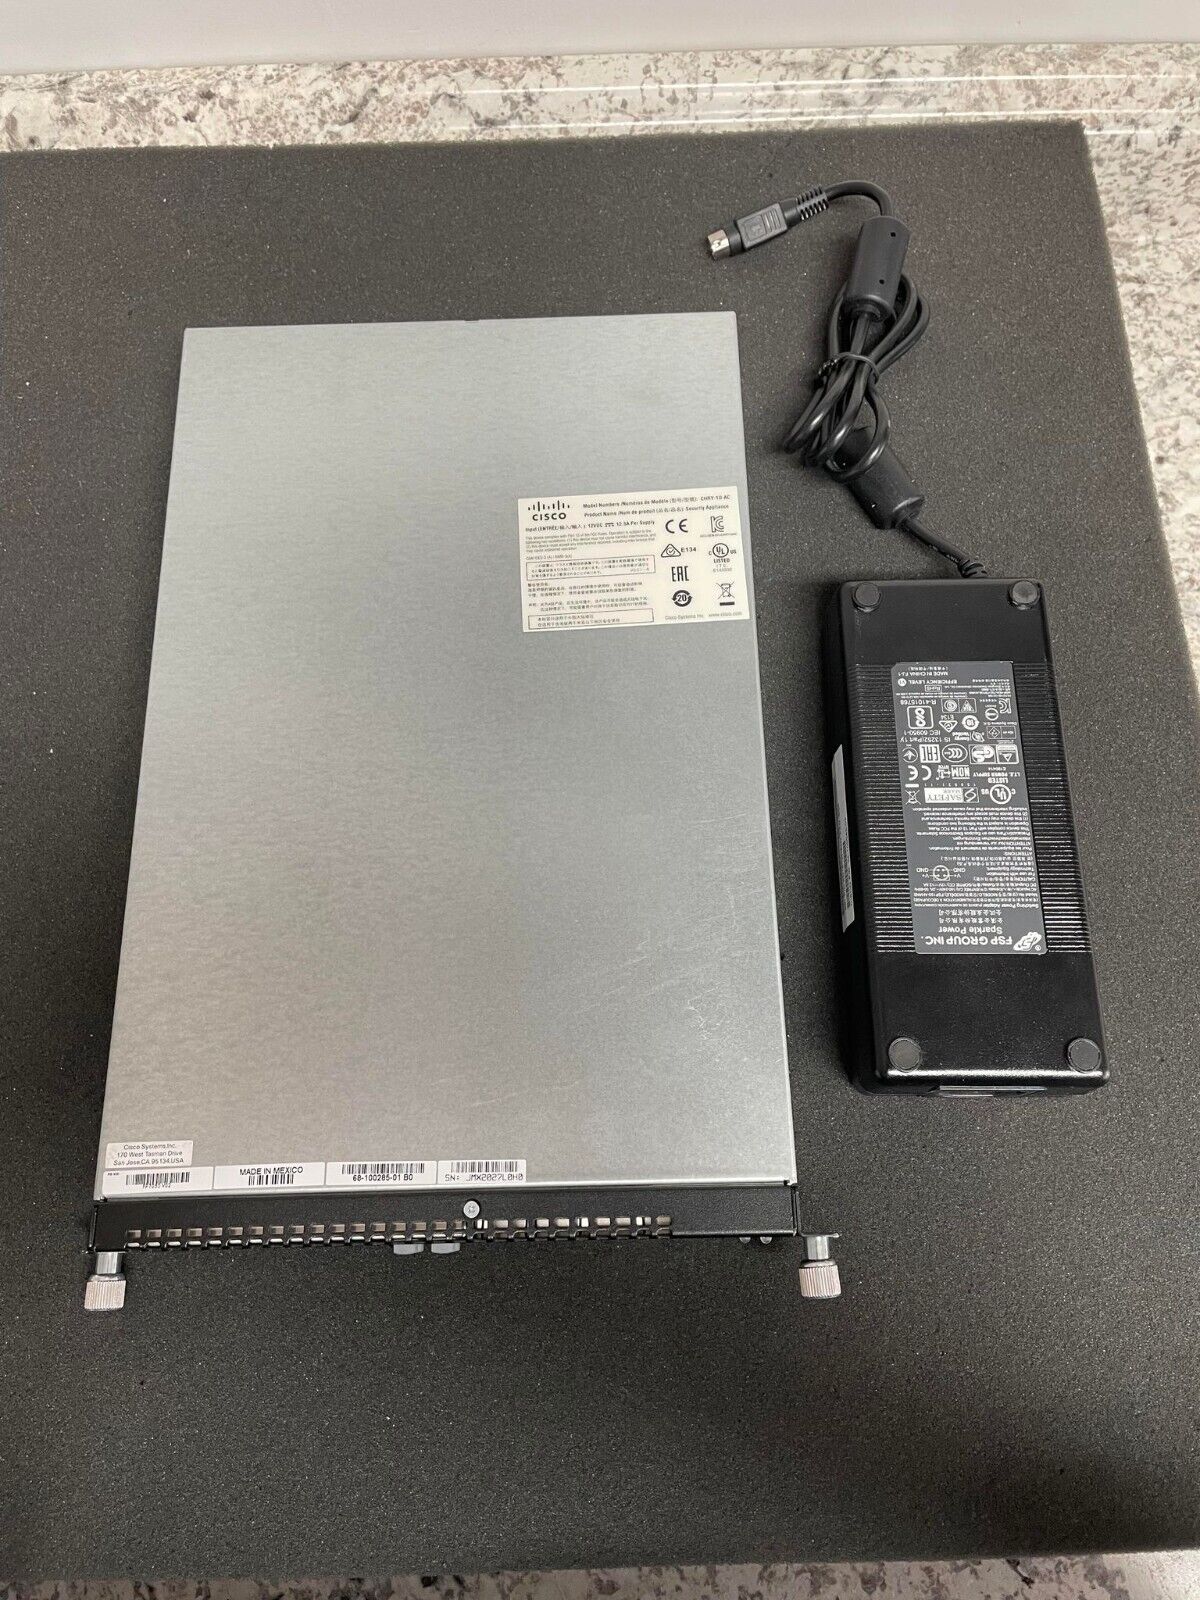 Cisco SourceFire CHRY-1U-AC - Security Appliance 7000 Series - Tested